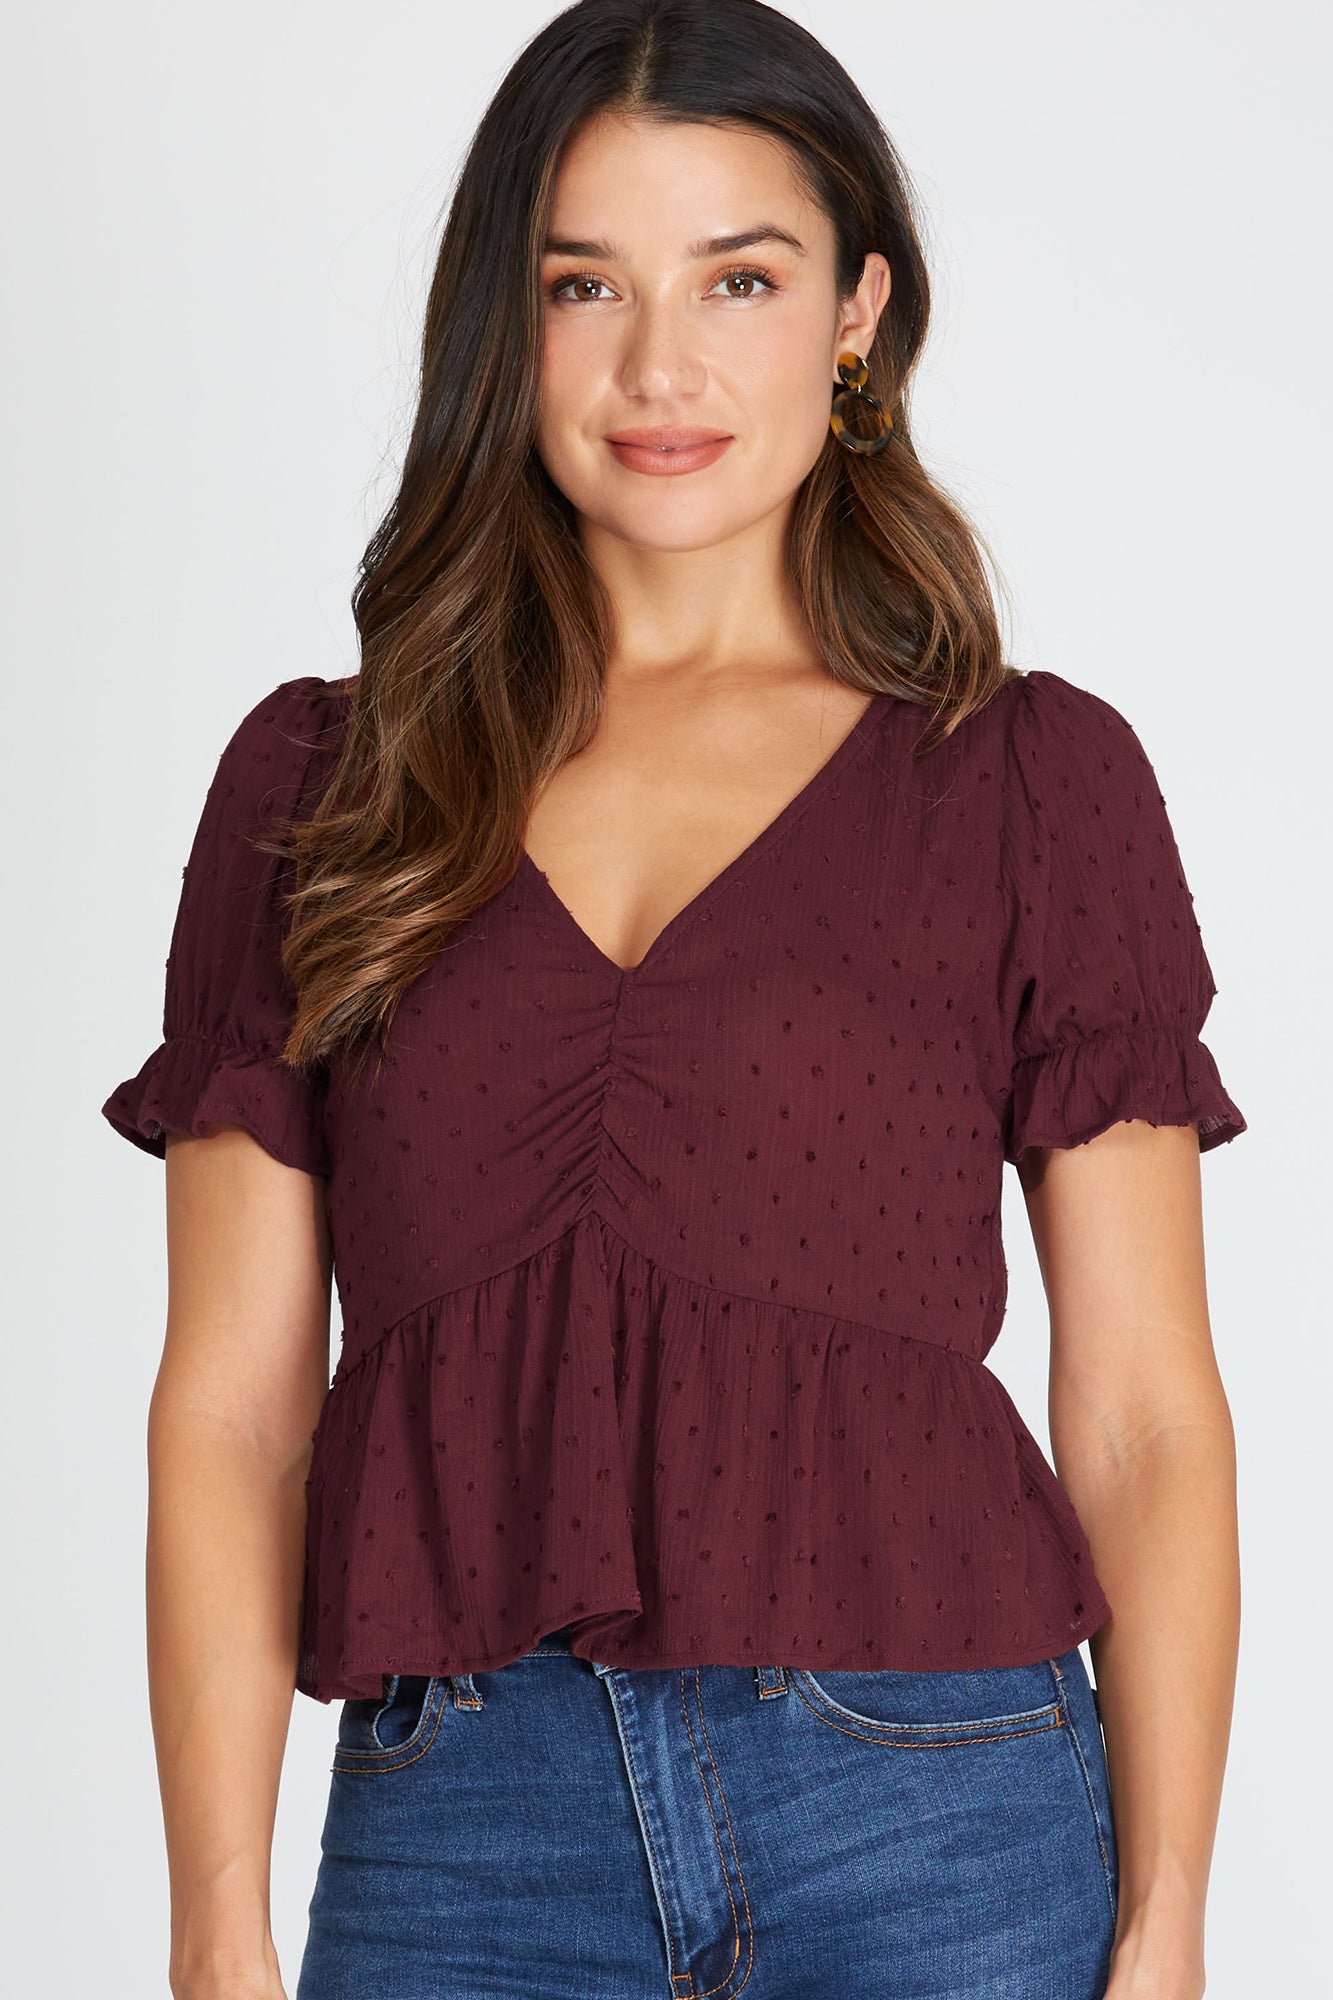 Short Sleeve Woven Top In Wine Color!